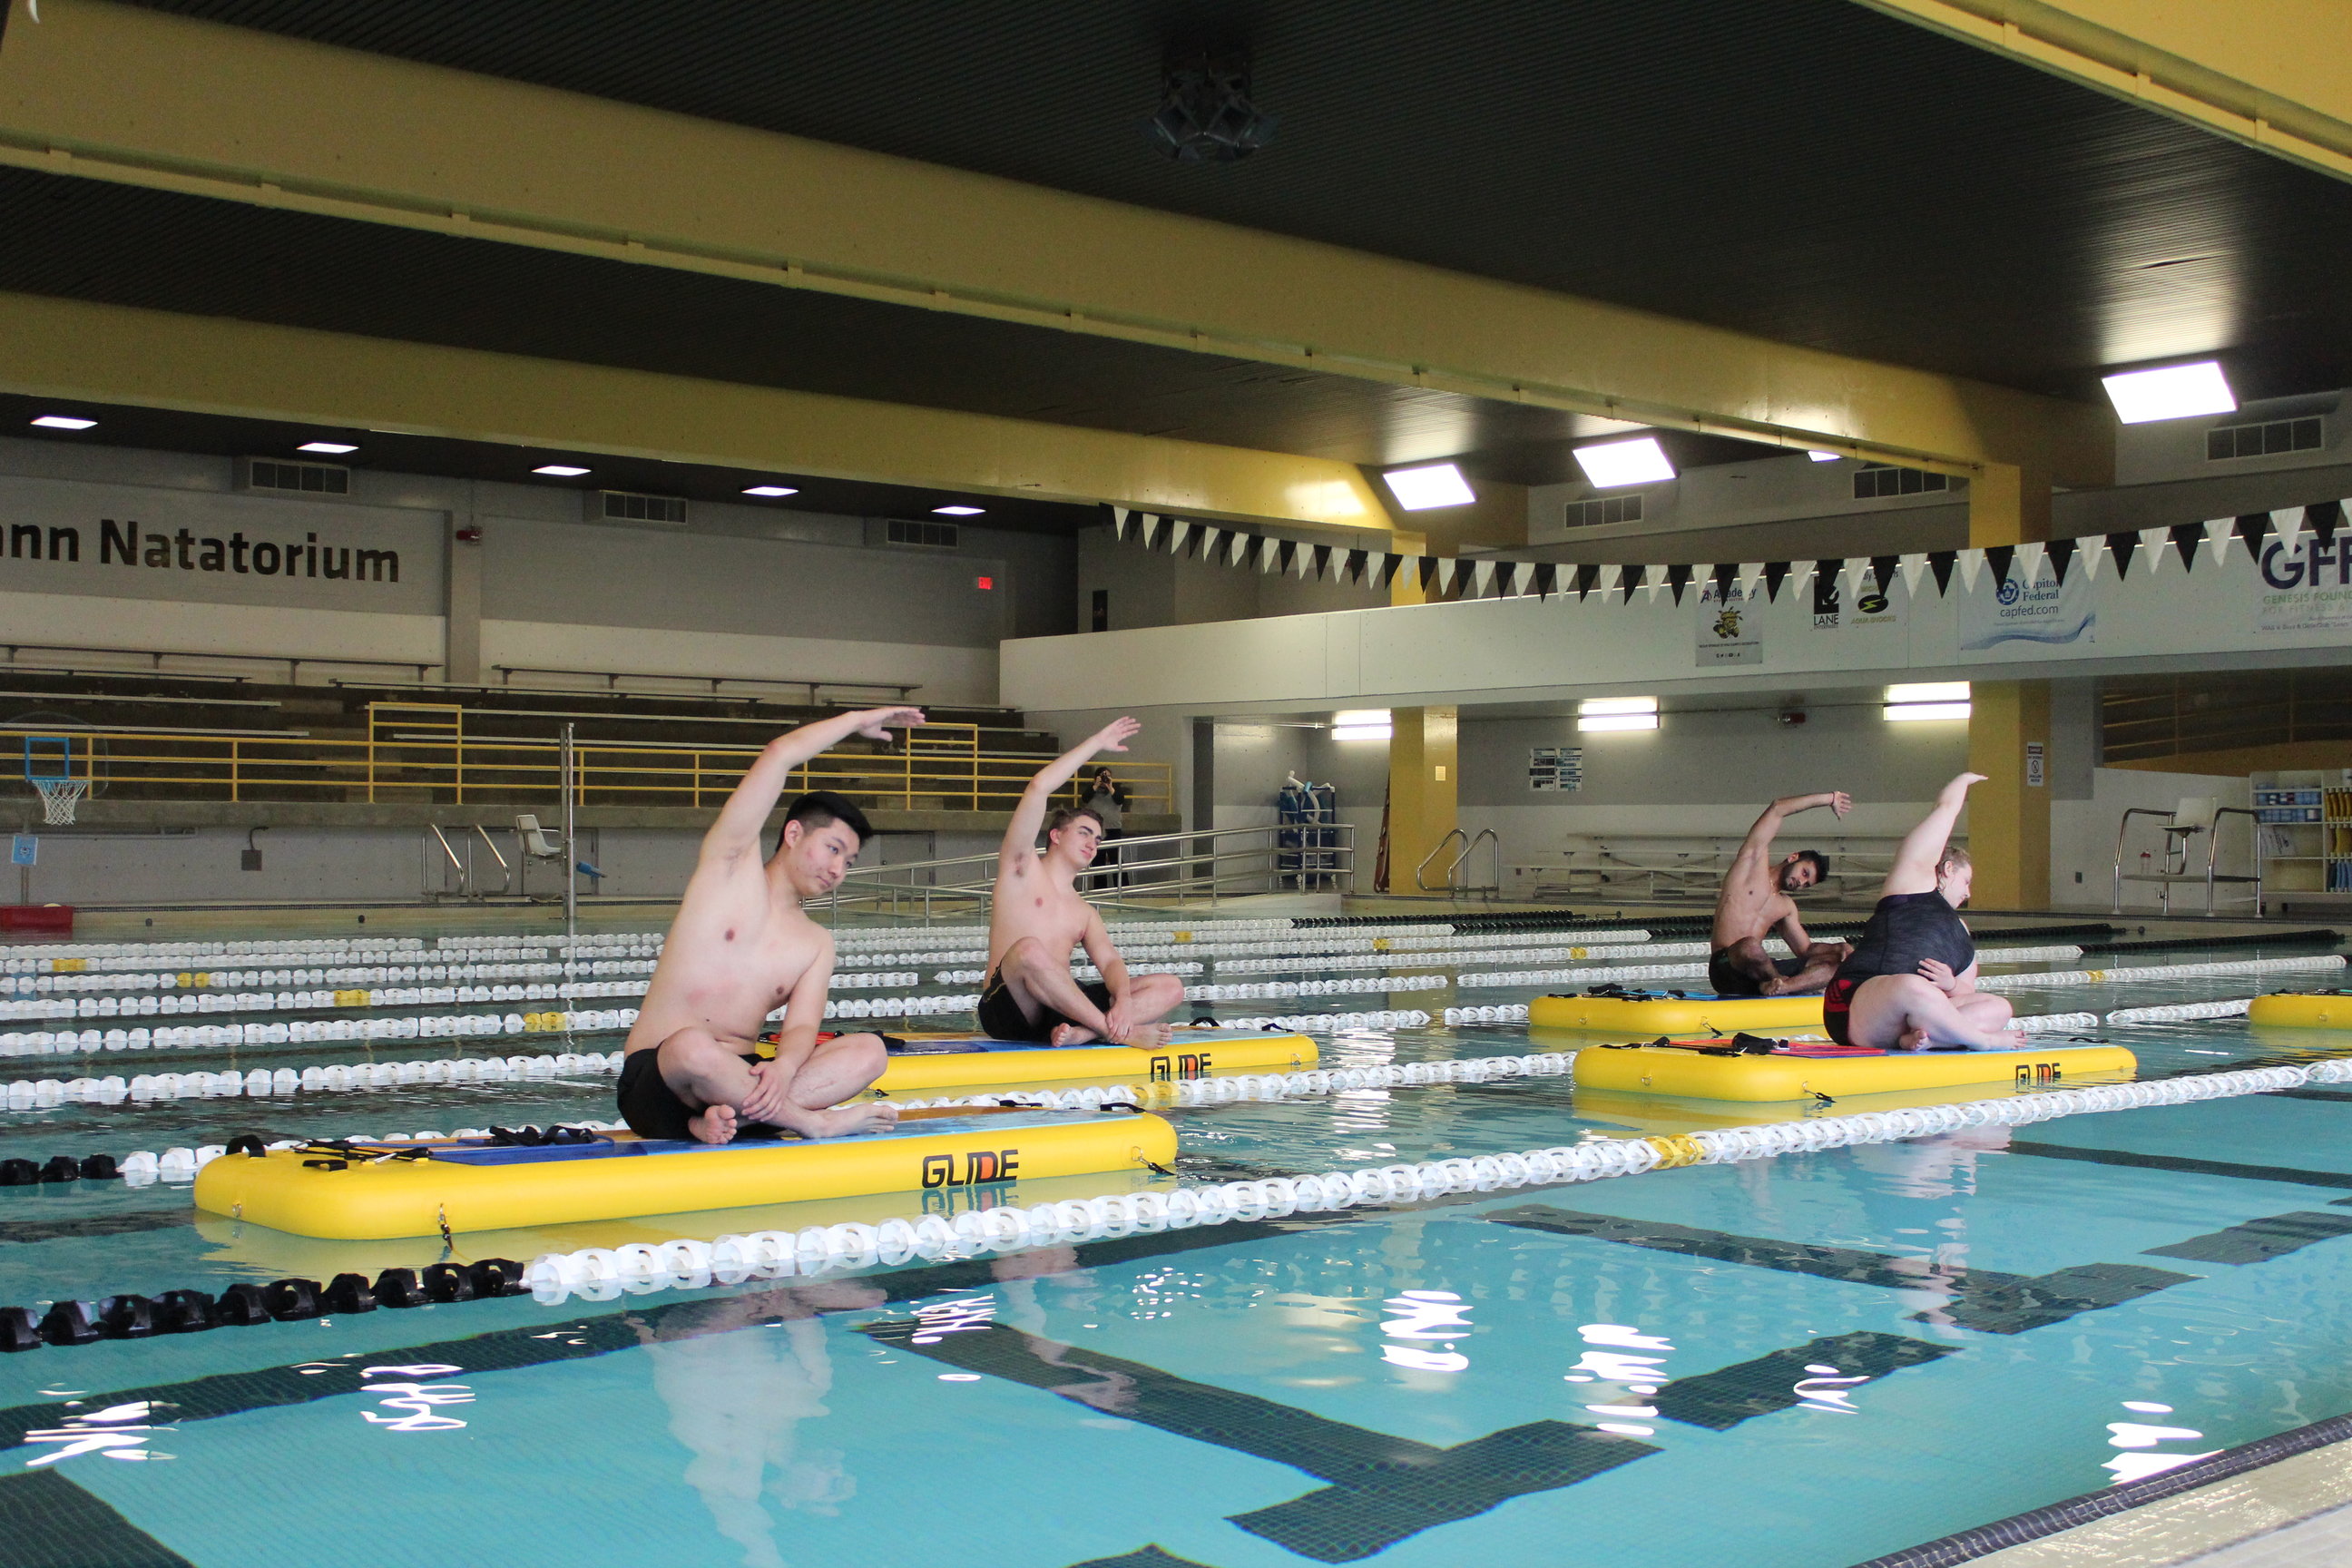 Four people sitting on GlideFit boards in the Wiedemann Natorium Pool. They are doing a yoga pose; sitting cross legged with one arm outstretched over their heads.